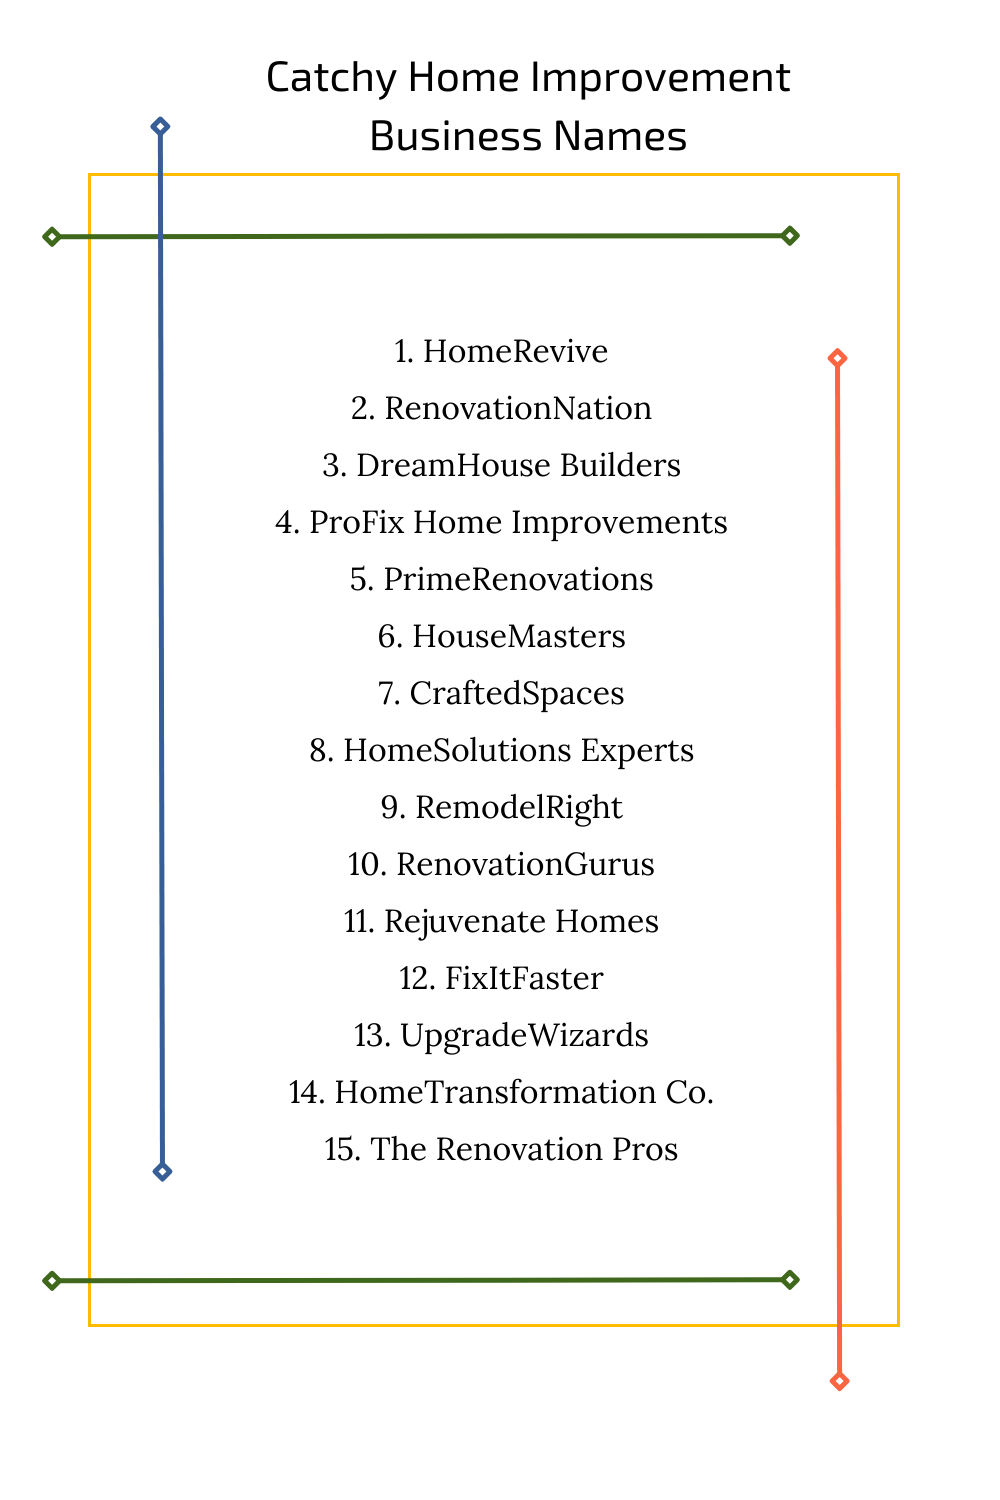 Catchy Home Improvement Business Names